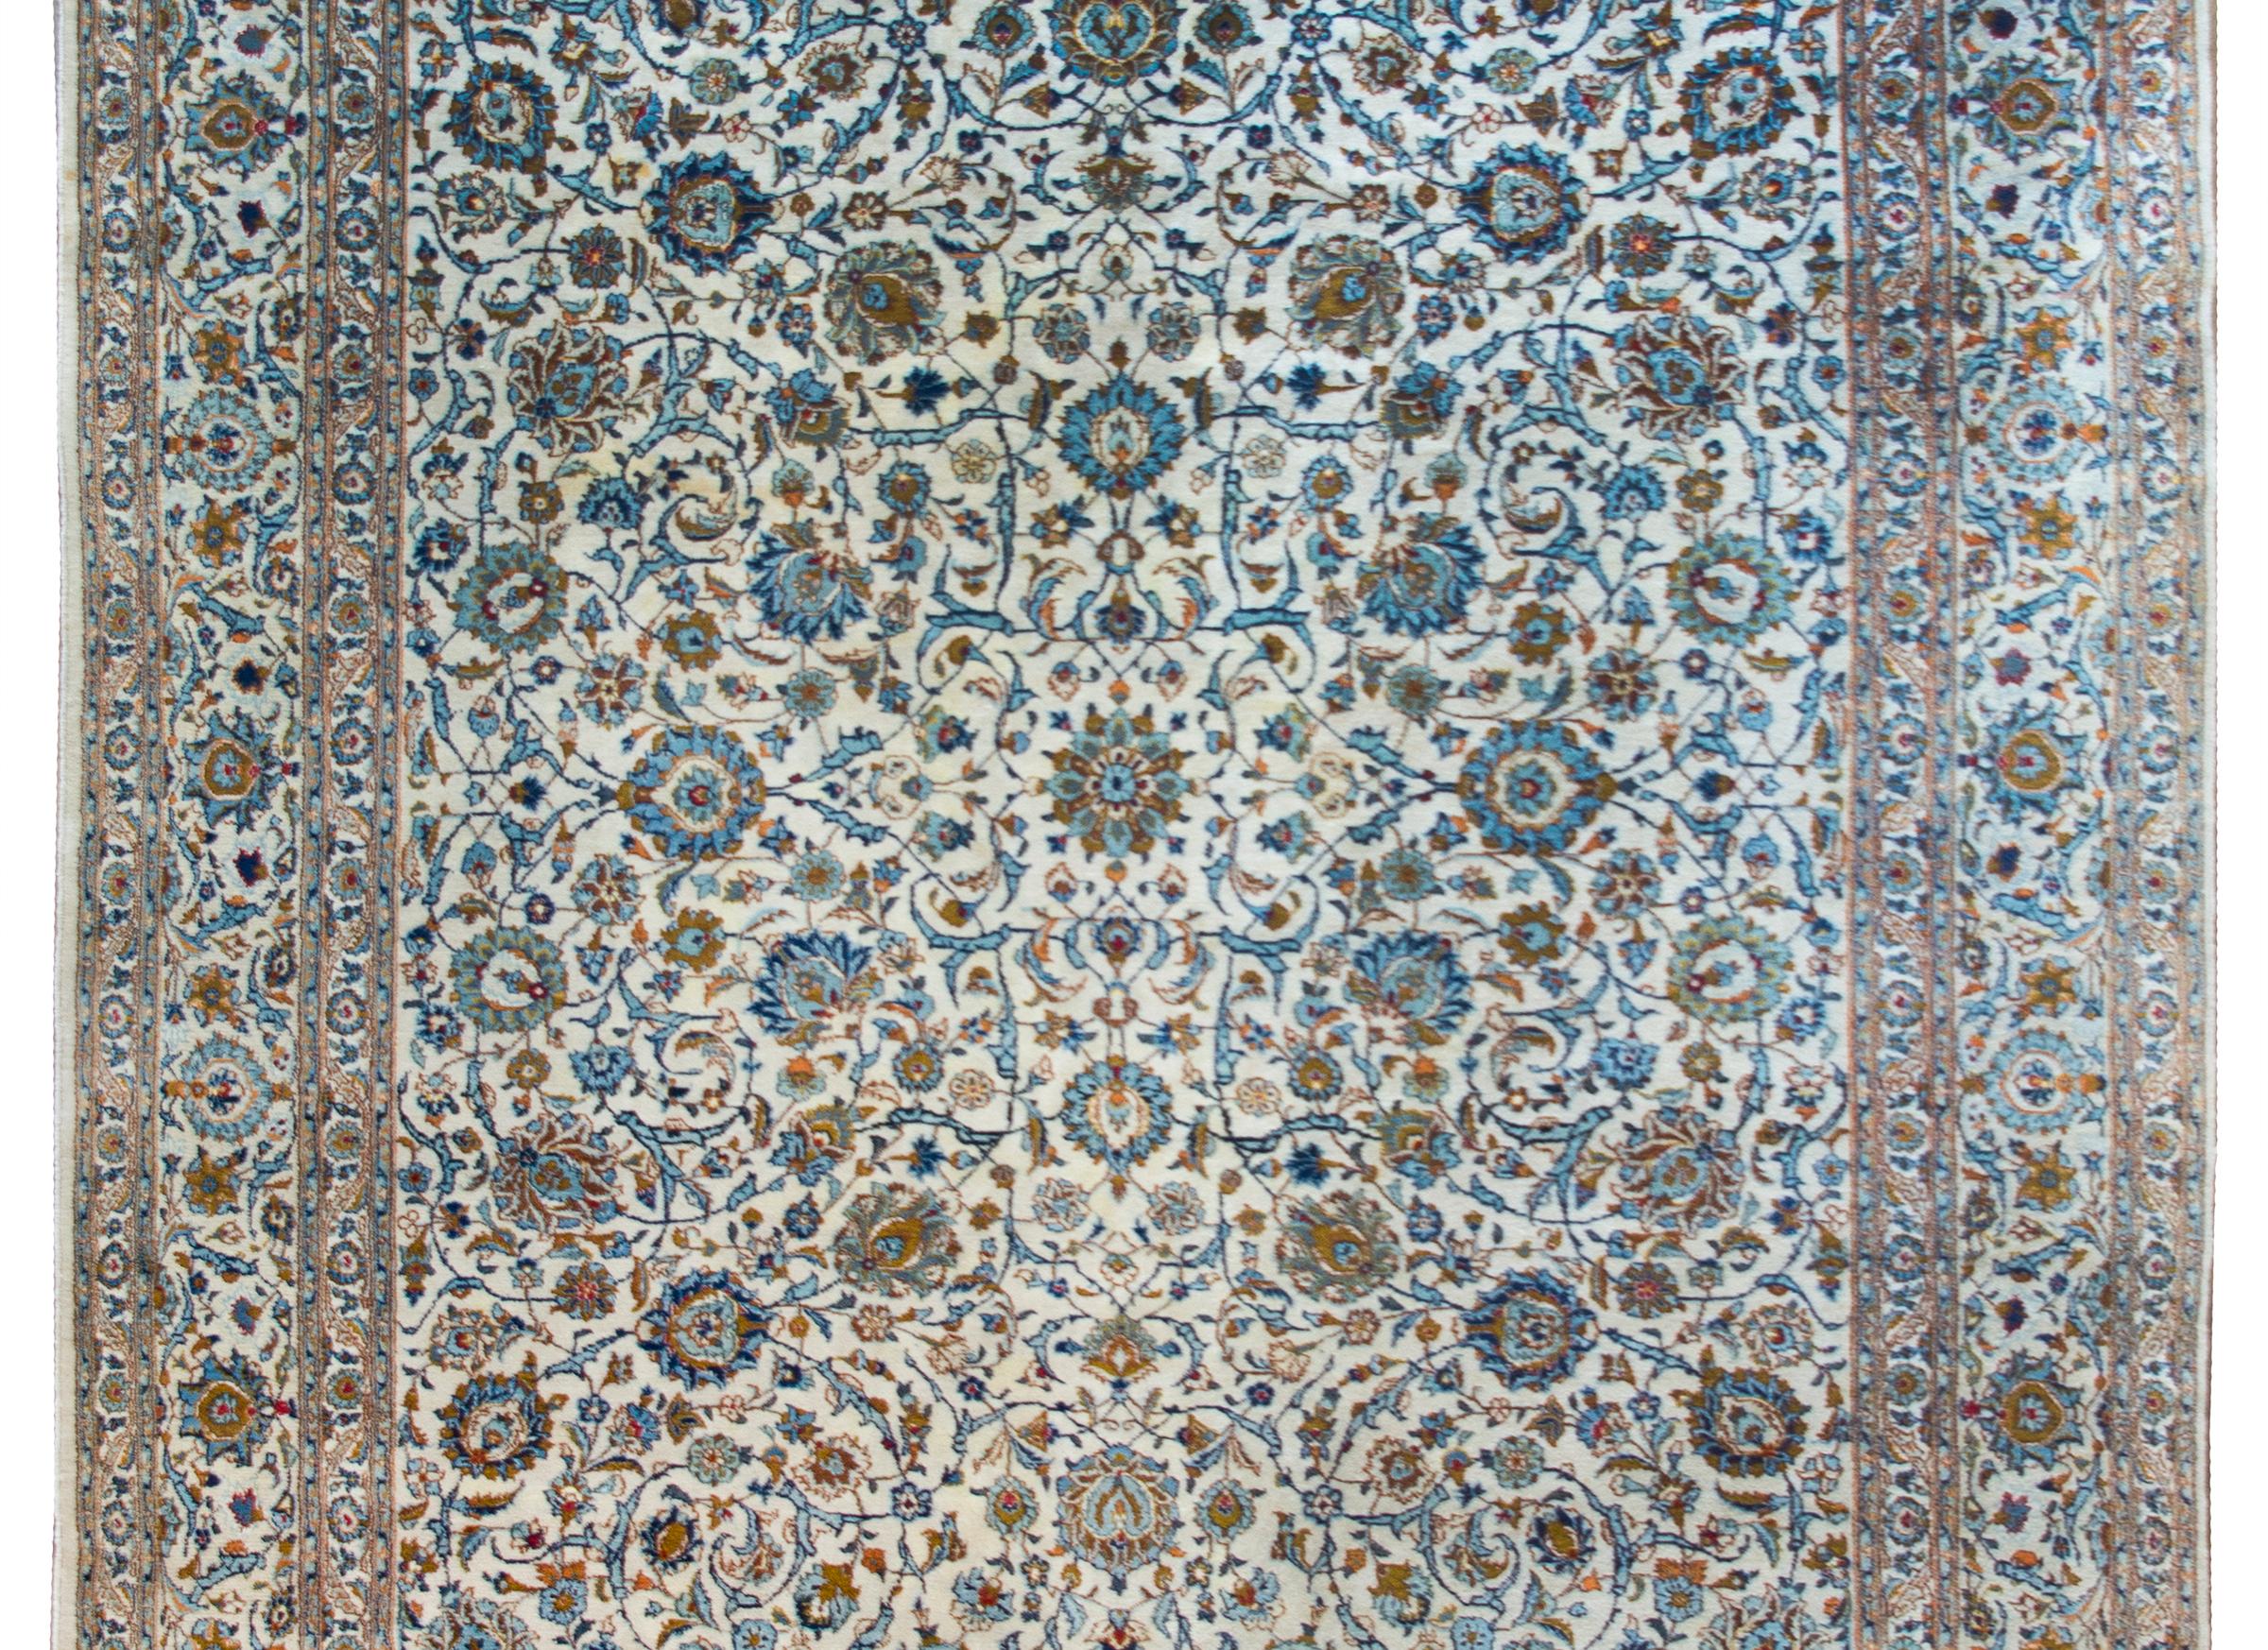 A beautiful mid-20th century Persian Kashan rug with an all-over intensely woven floral and scrolling vine pattern with myriad flowers woven in light and dark indigo, crimson, and copper colored wool, set against a cream colored background, and